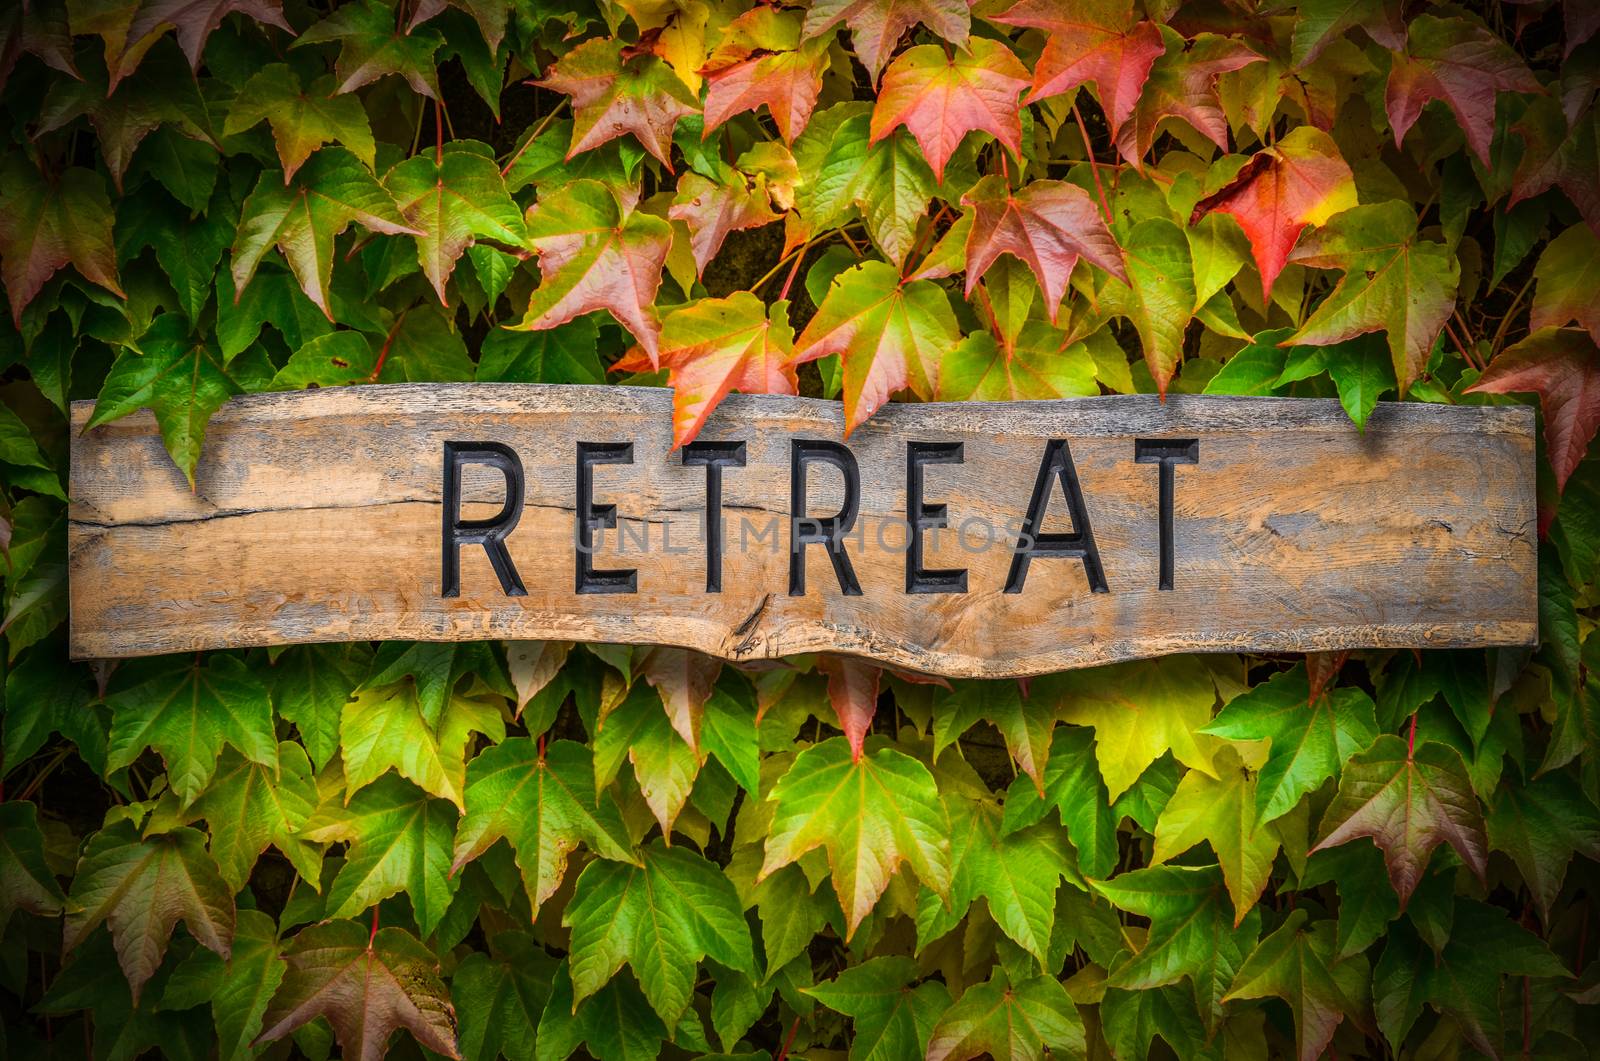 Rustic Wooden Carved Sign For A Spiritual Retreat Against A Beautiful Leafy Backdrop